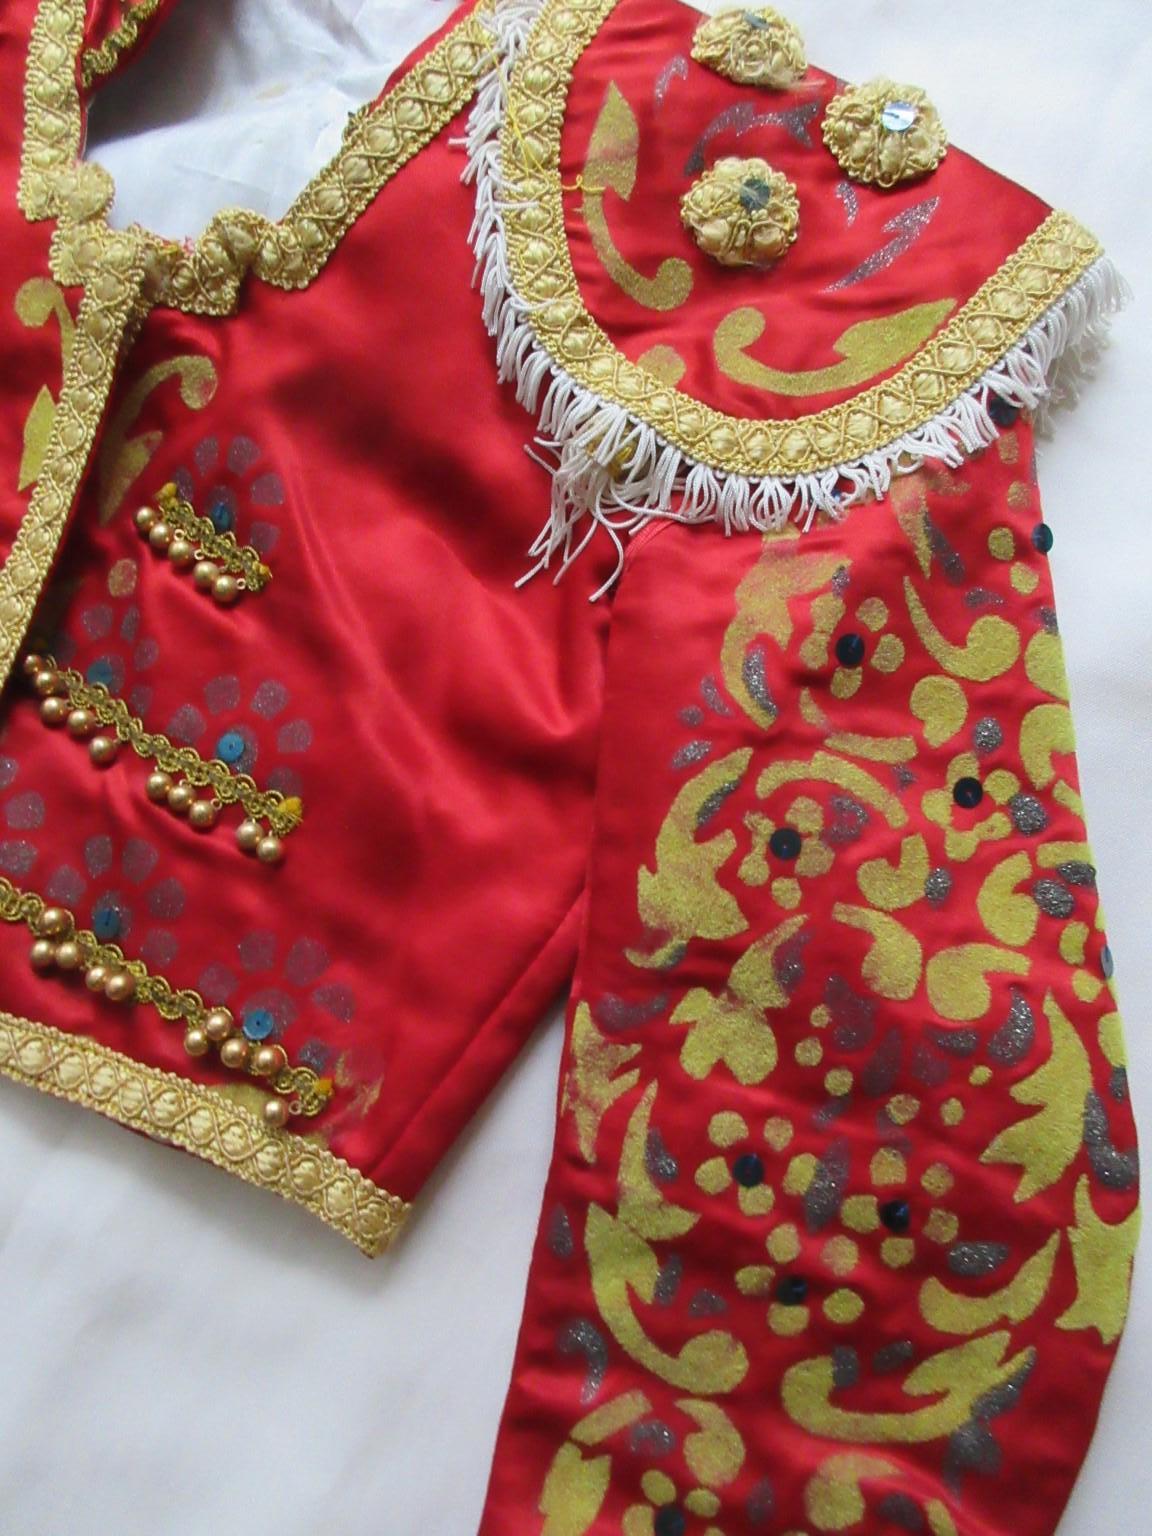 bullfighter outfit